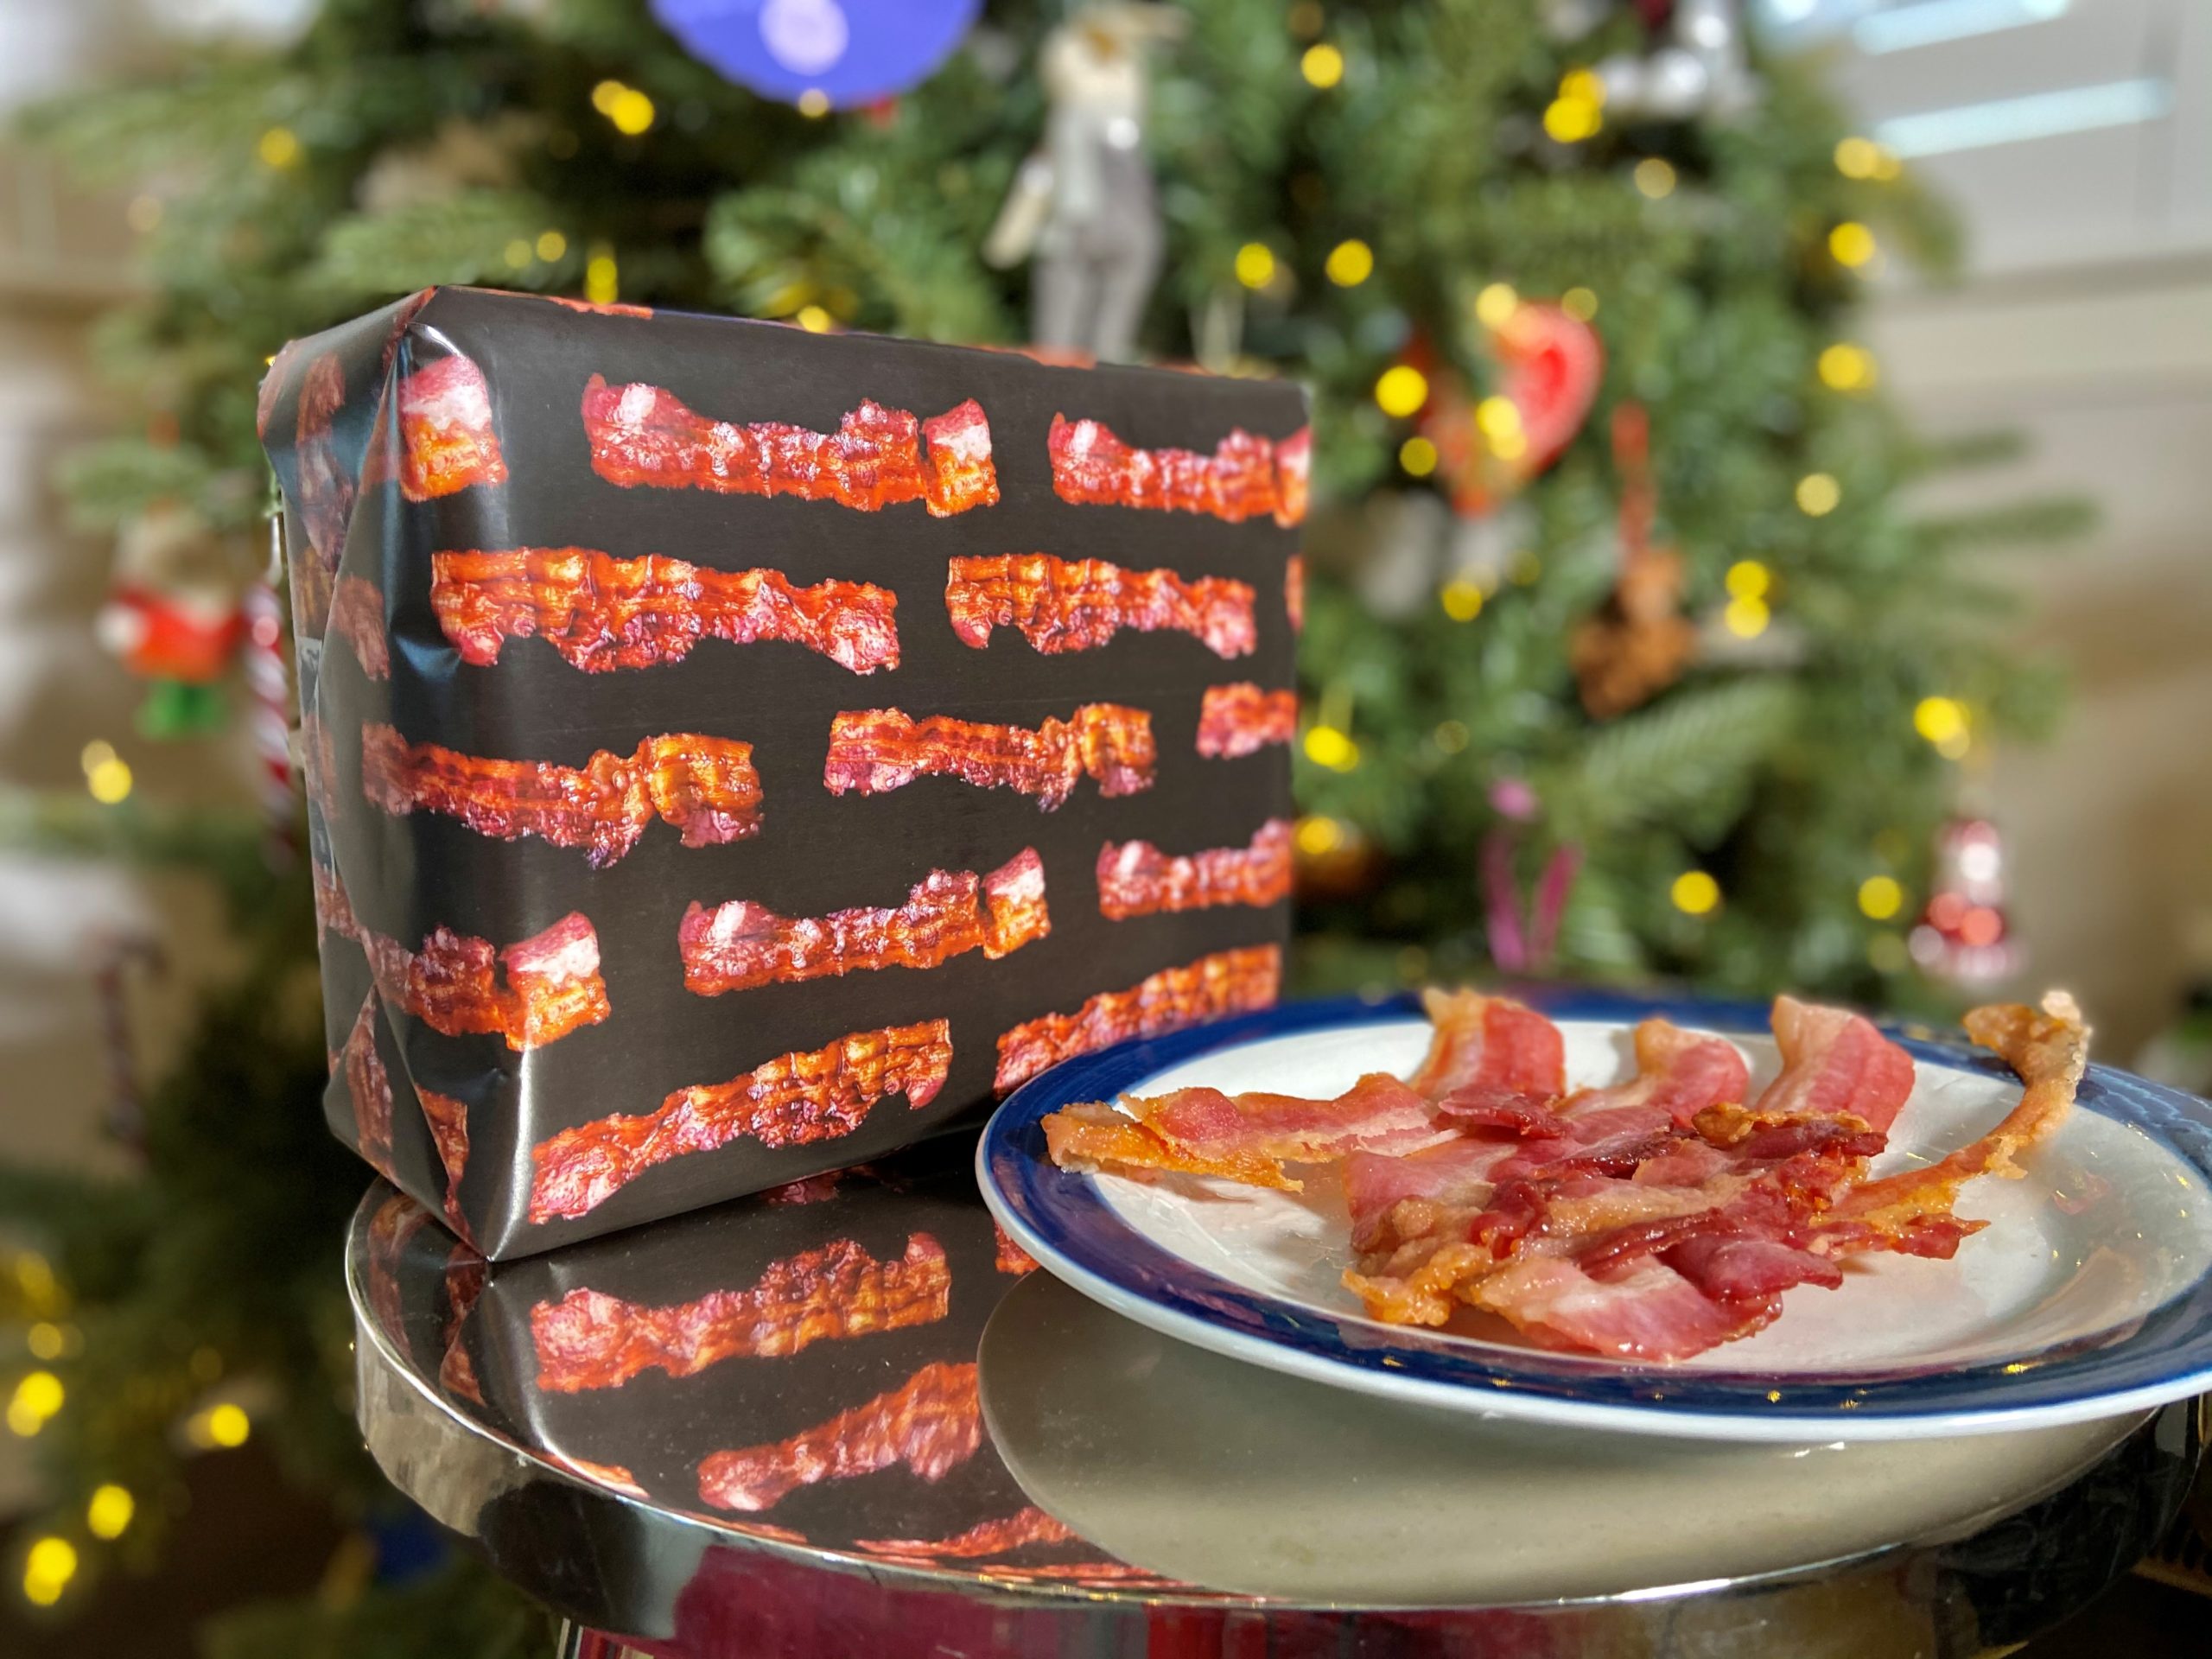 Bacon-scented wrapping paper is a thing: Here's how to get it 